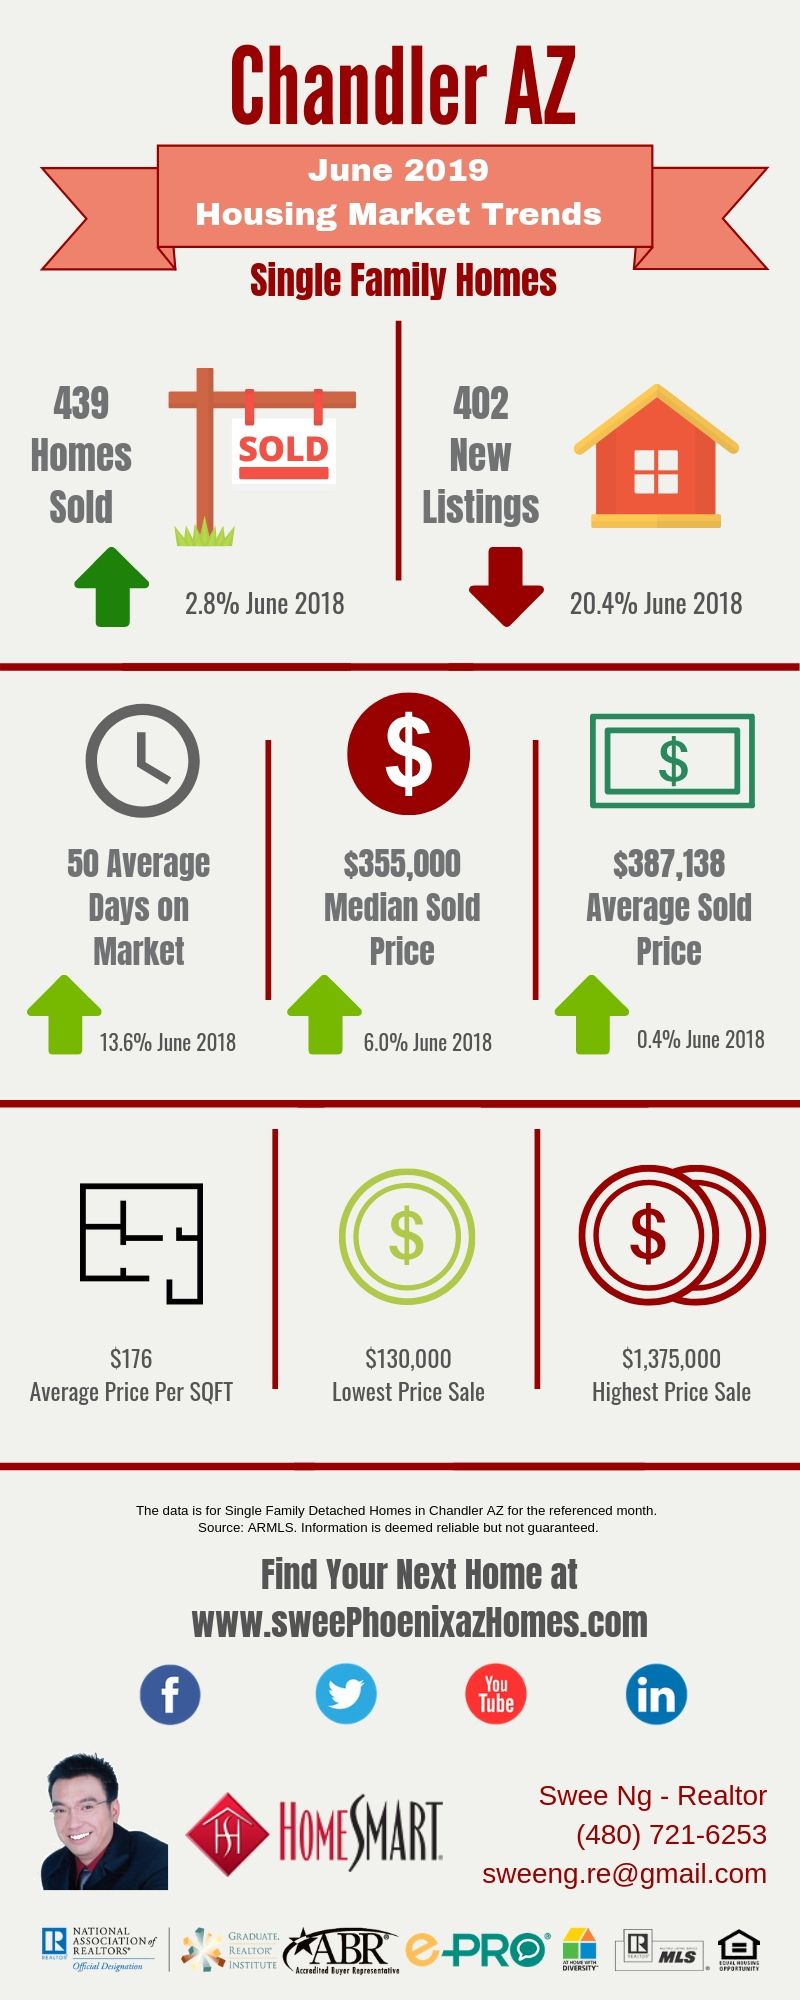 Chandler AZ Housing Market Update June 2019 by Swee Ng, House Value and Real Estate Listings